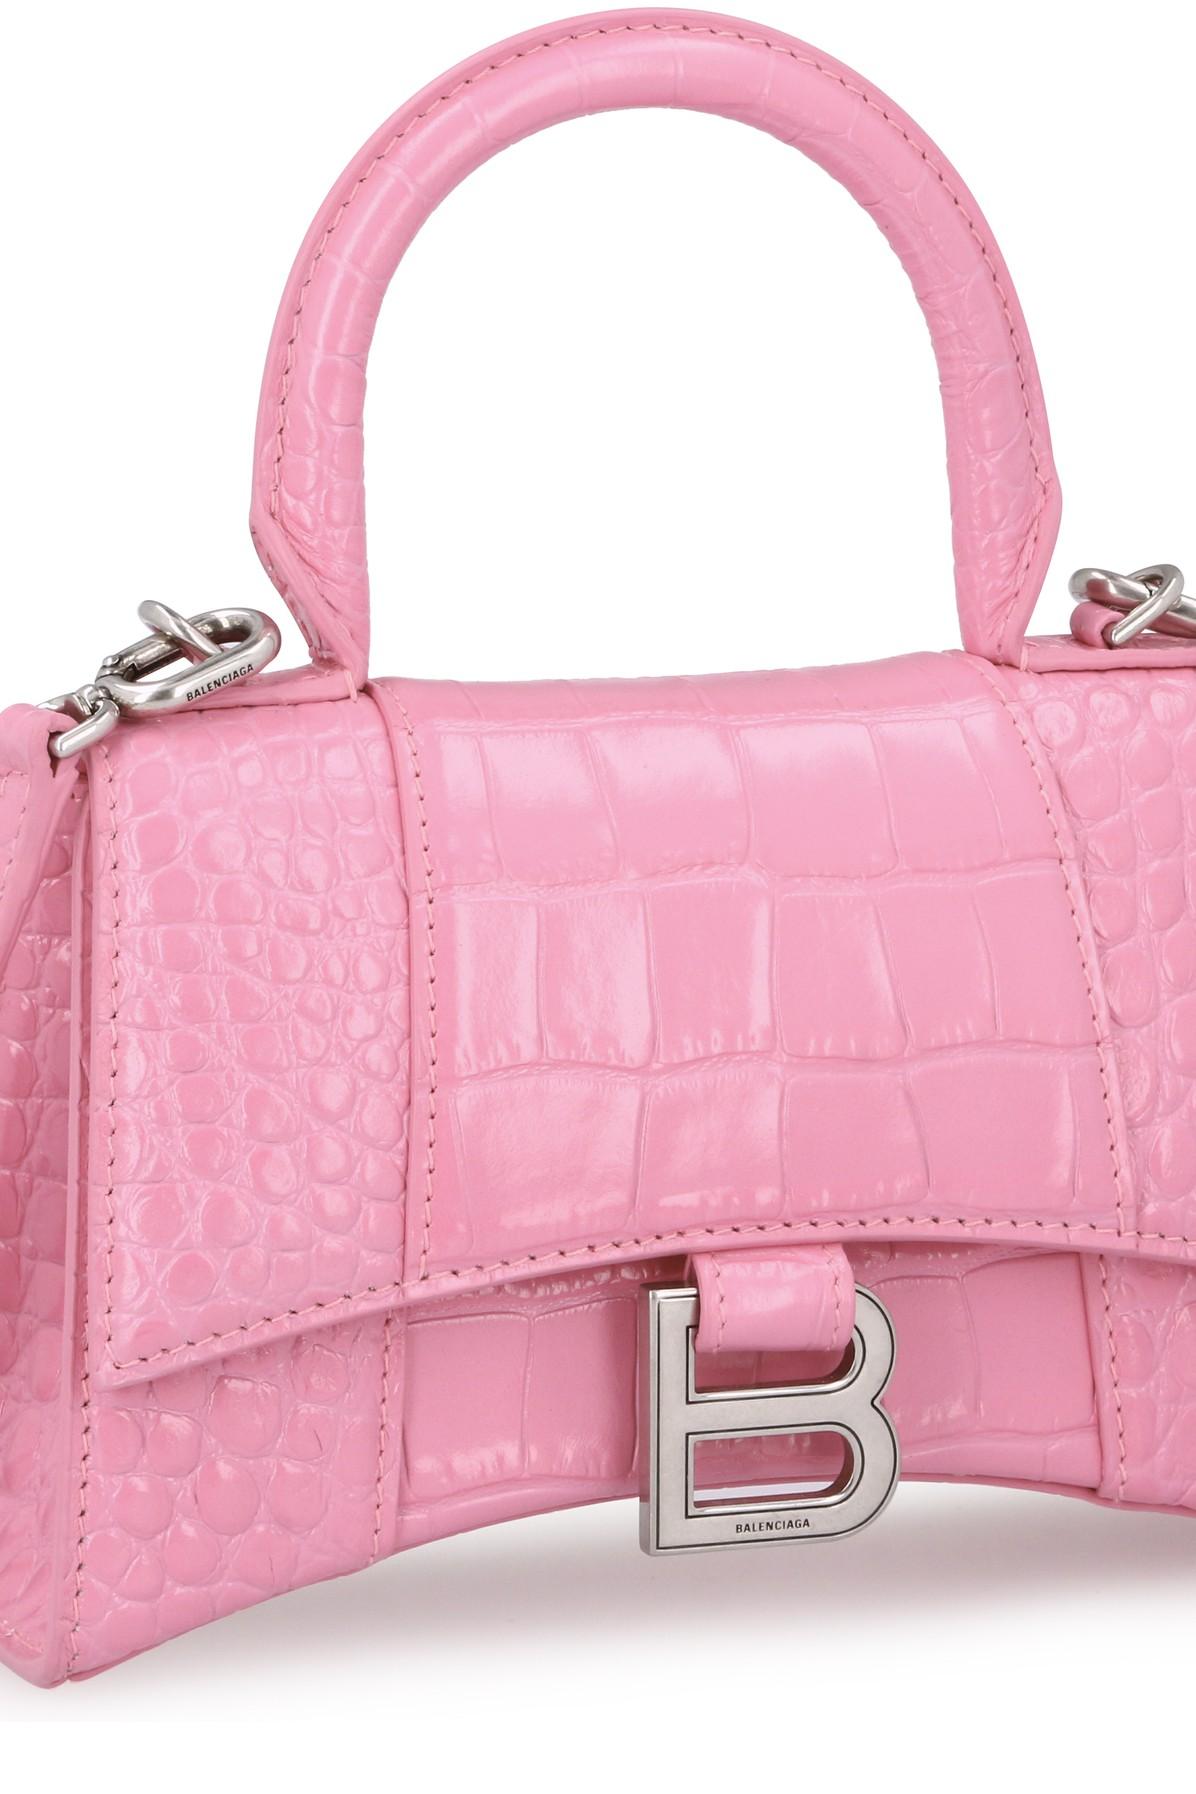 Balenciaga Hourglass Xs Top Handle in Baby Pink (Pink) | Lyst